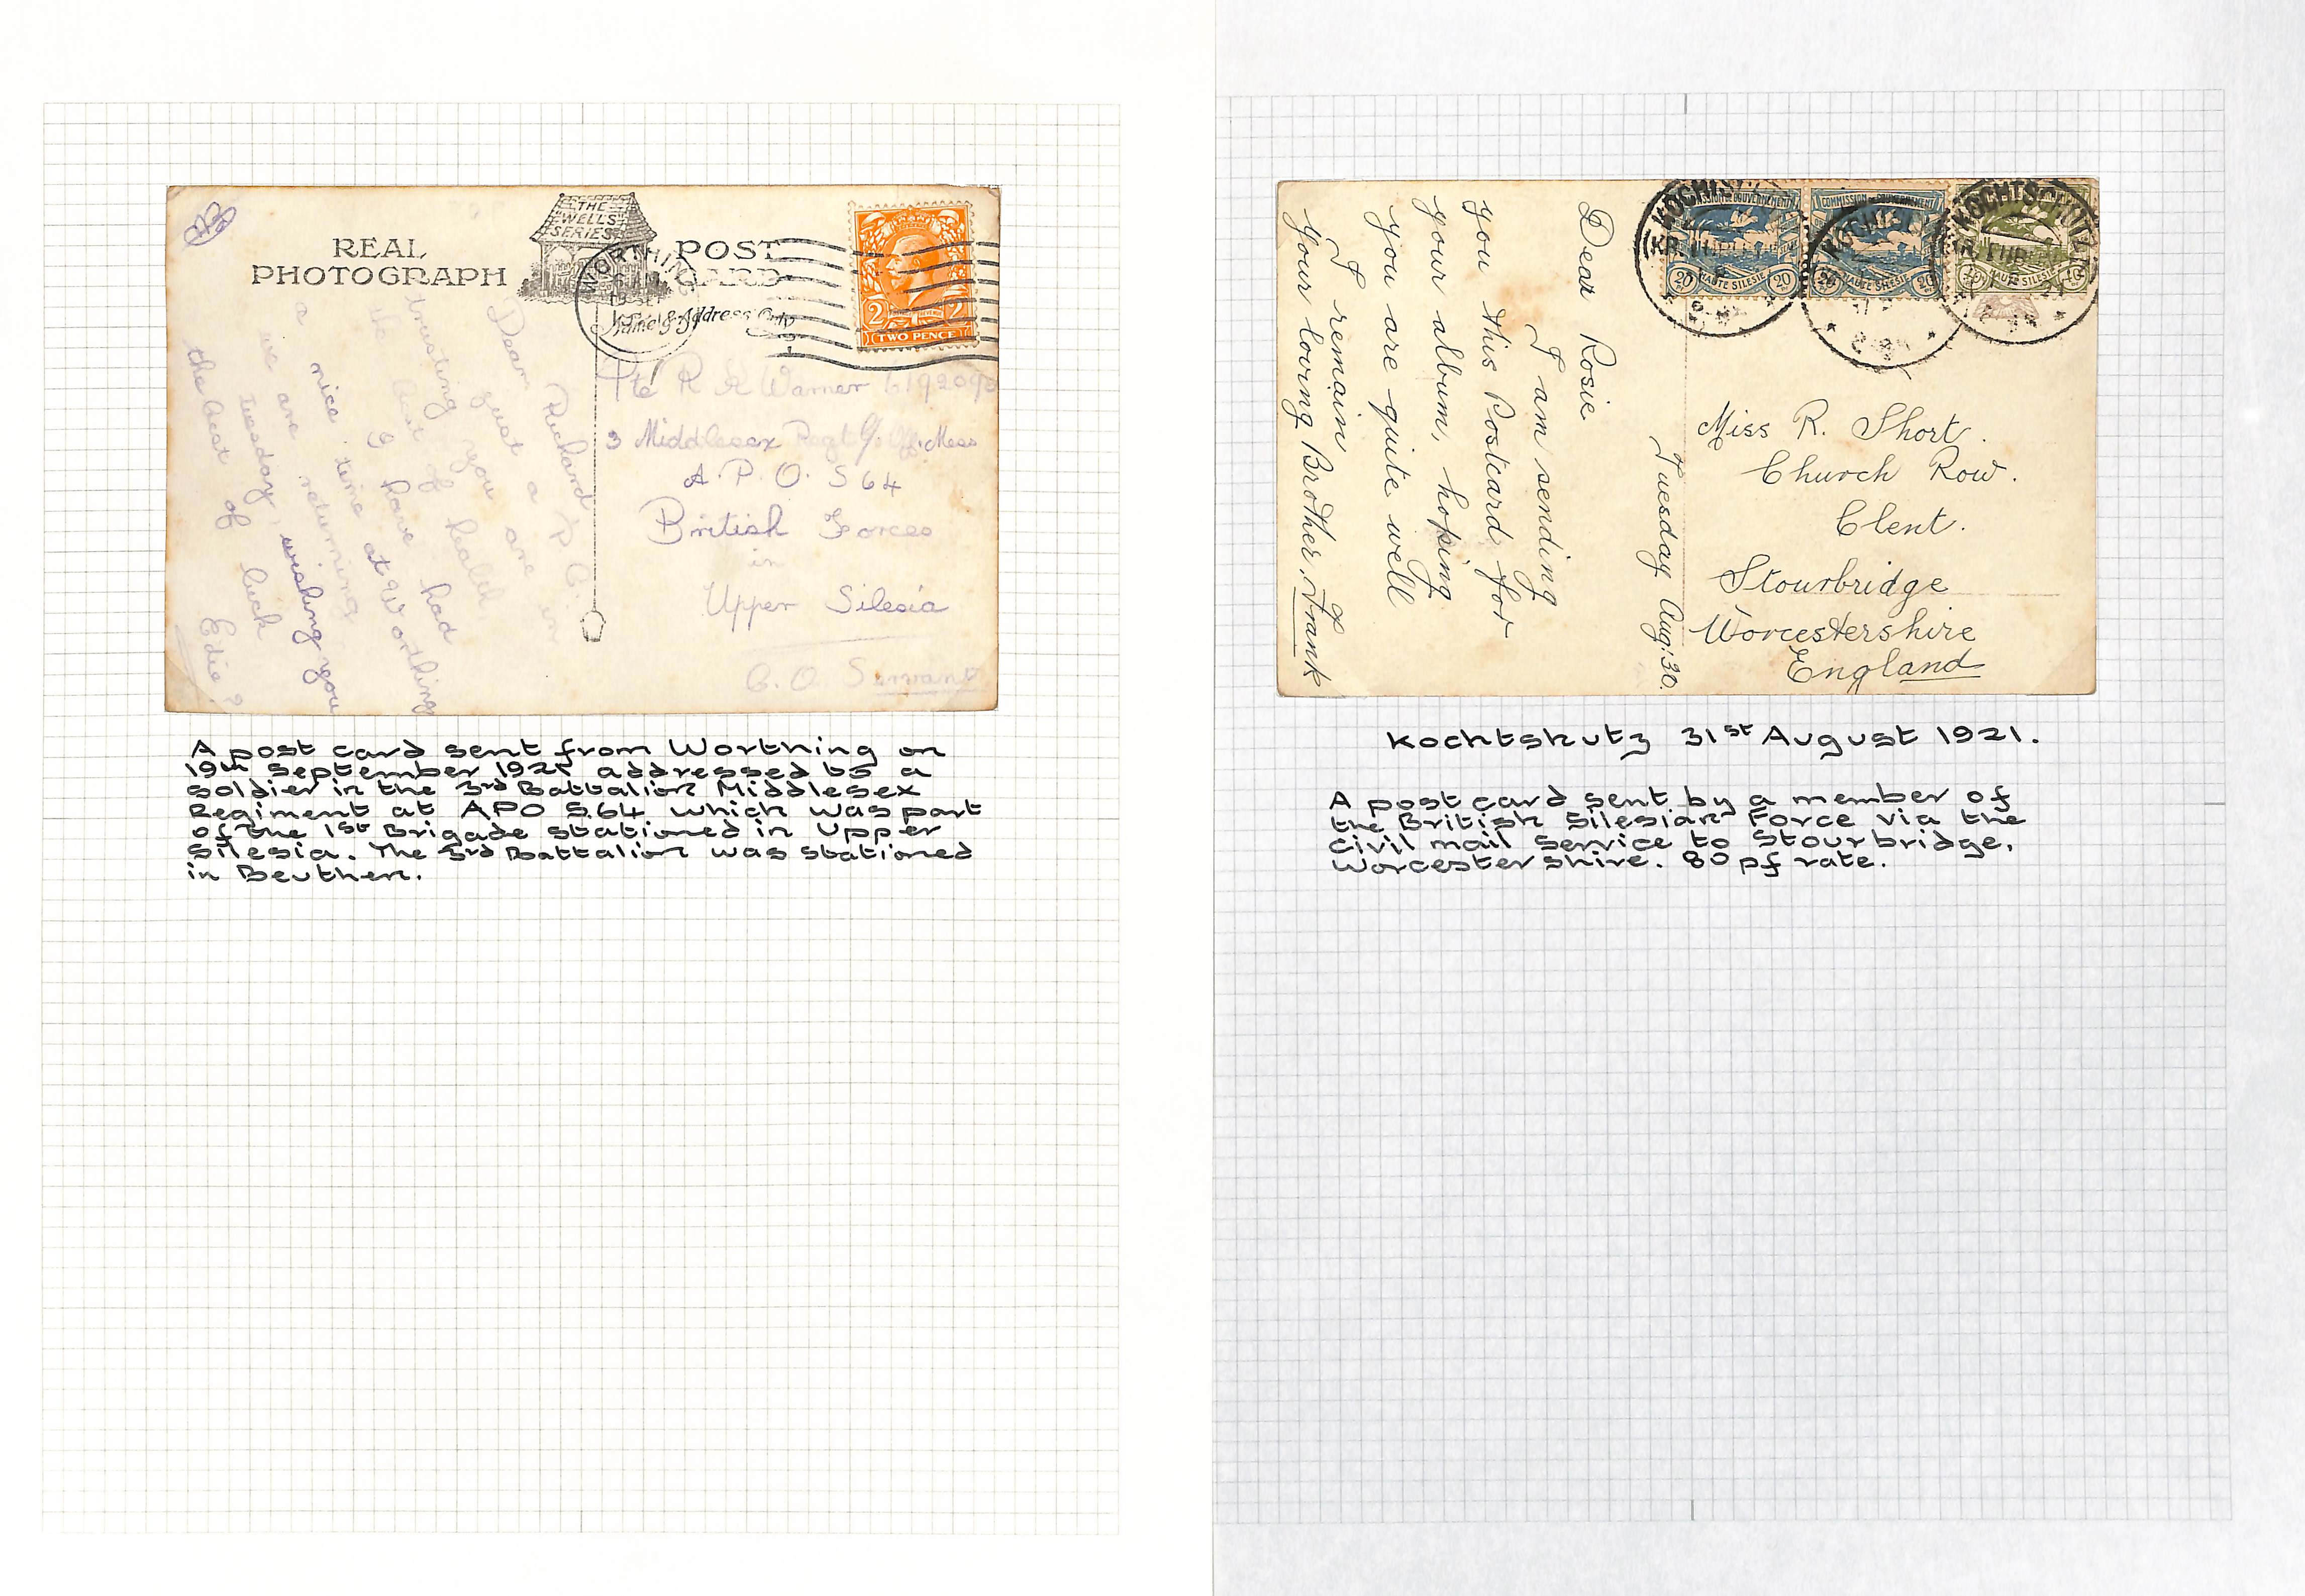 Upper Silesia. 1921 Covers and cards comprising Aug. 19th cover franked G.B ½d + 1½d cancelled "ARMY - Image 2 of 2